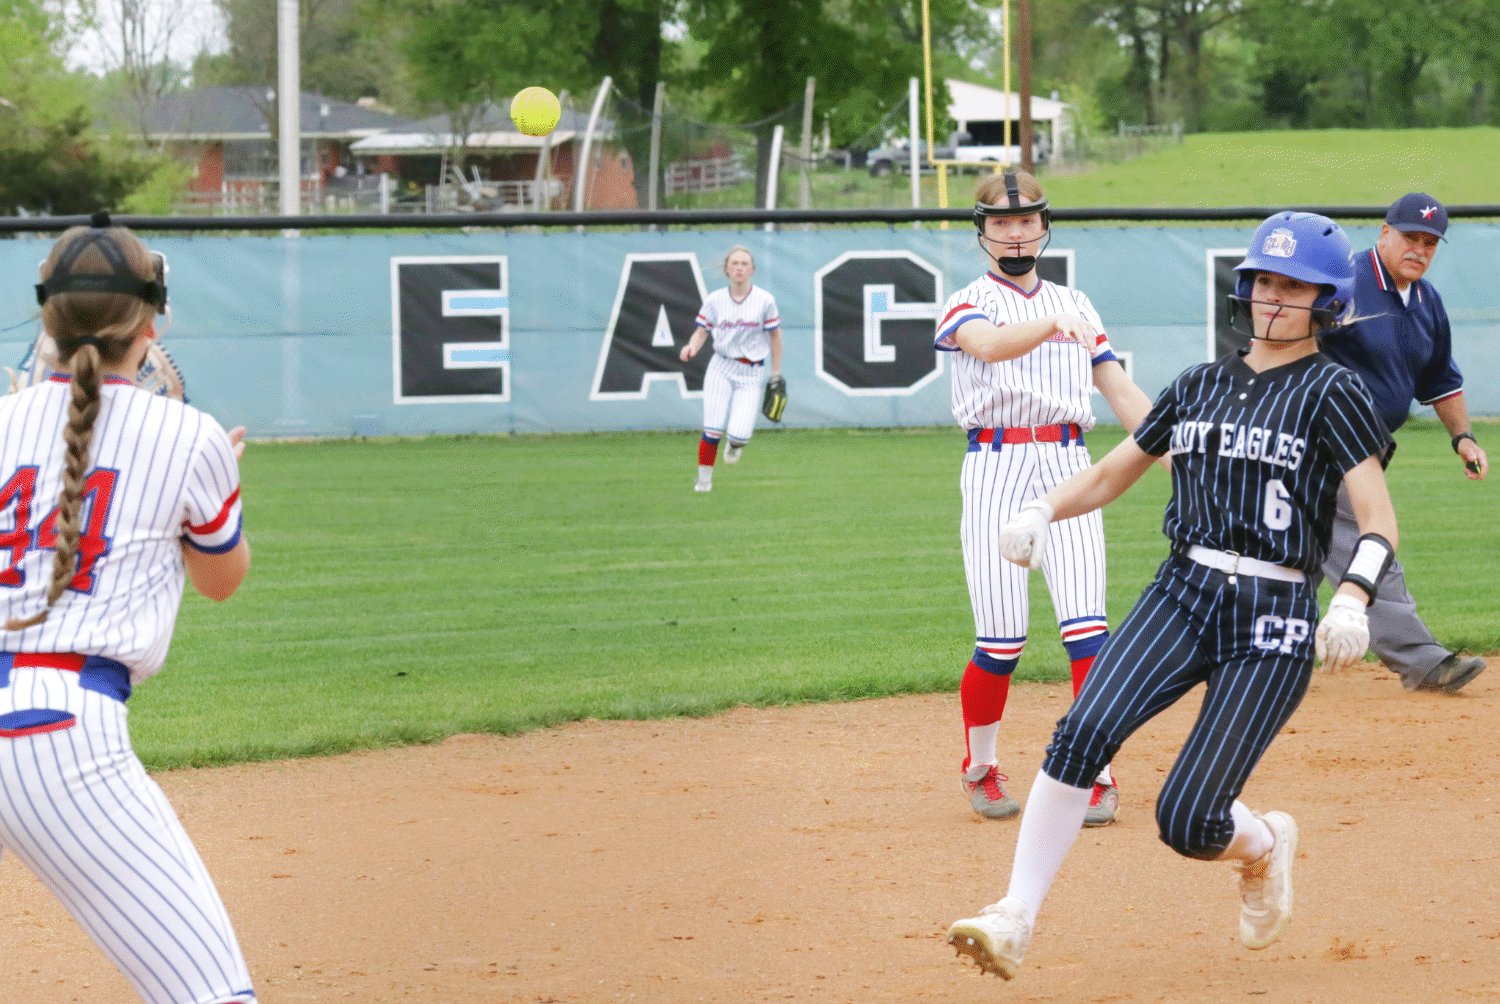 Lady Panther shortstop Cacie Lennon throws to teammate Skyler West at third in an effort to get the advancing Lady Eagle runner. It was a close play with the runner safely beating the tag.